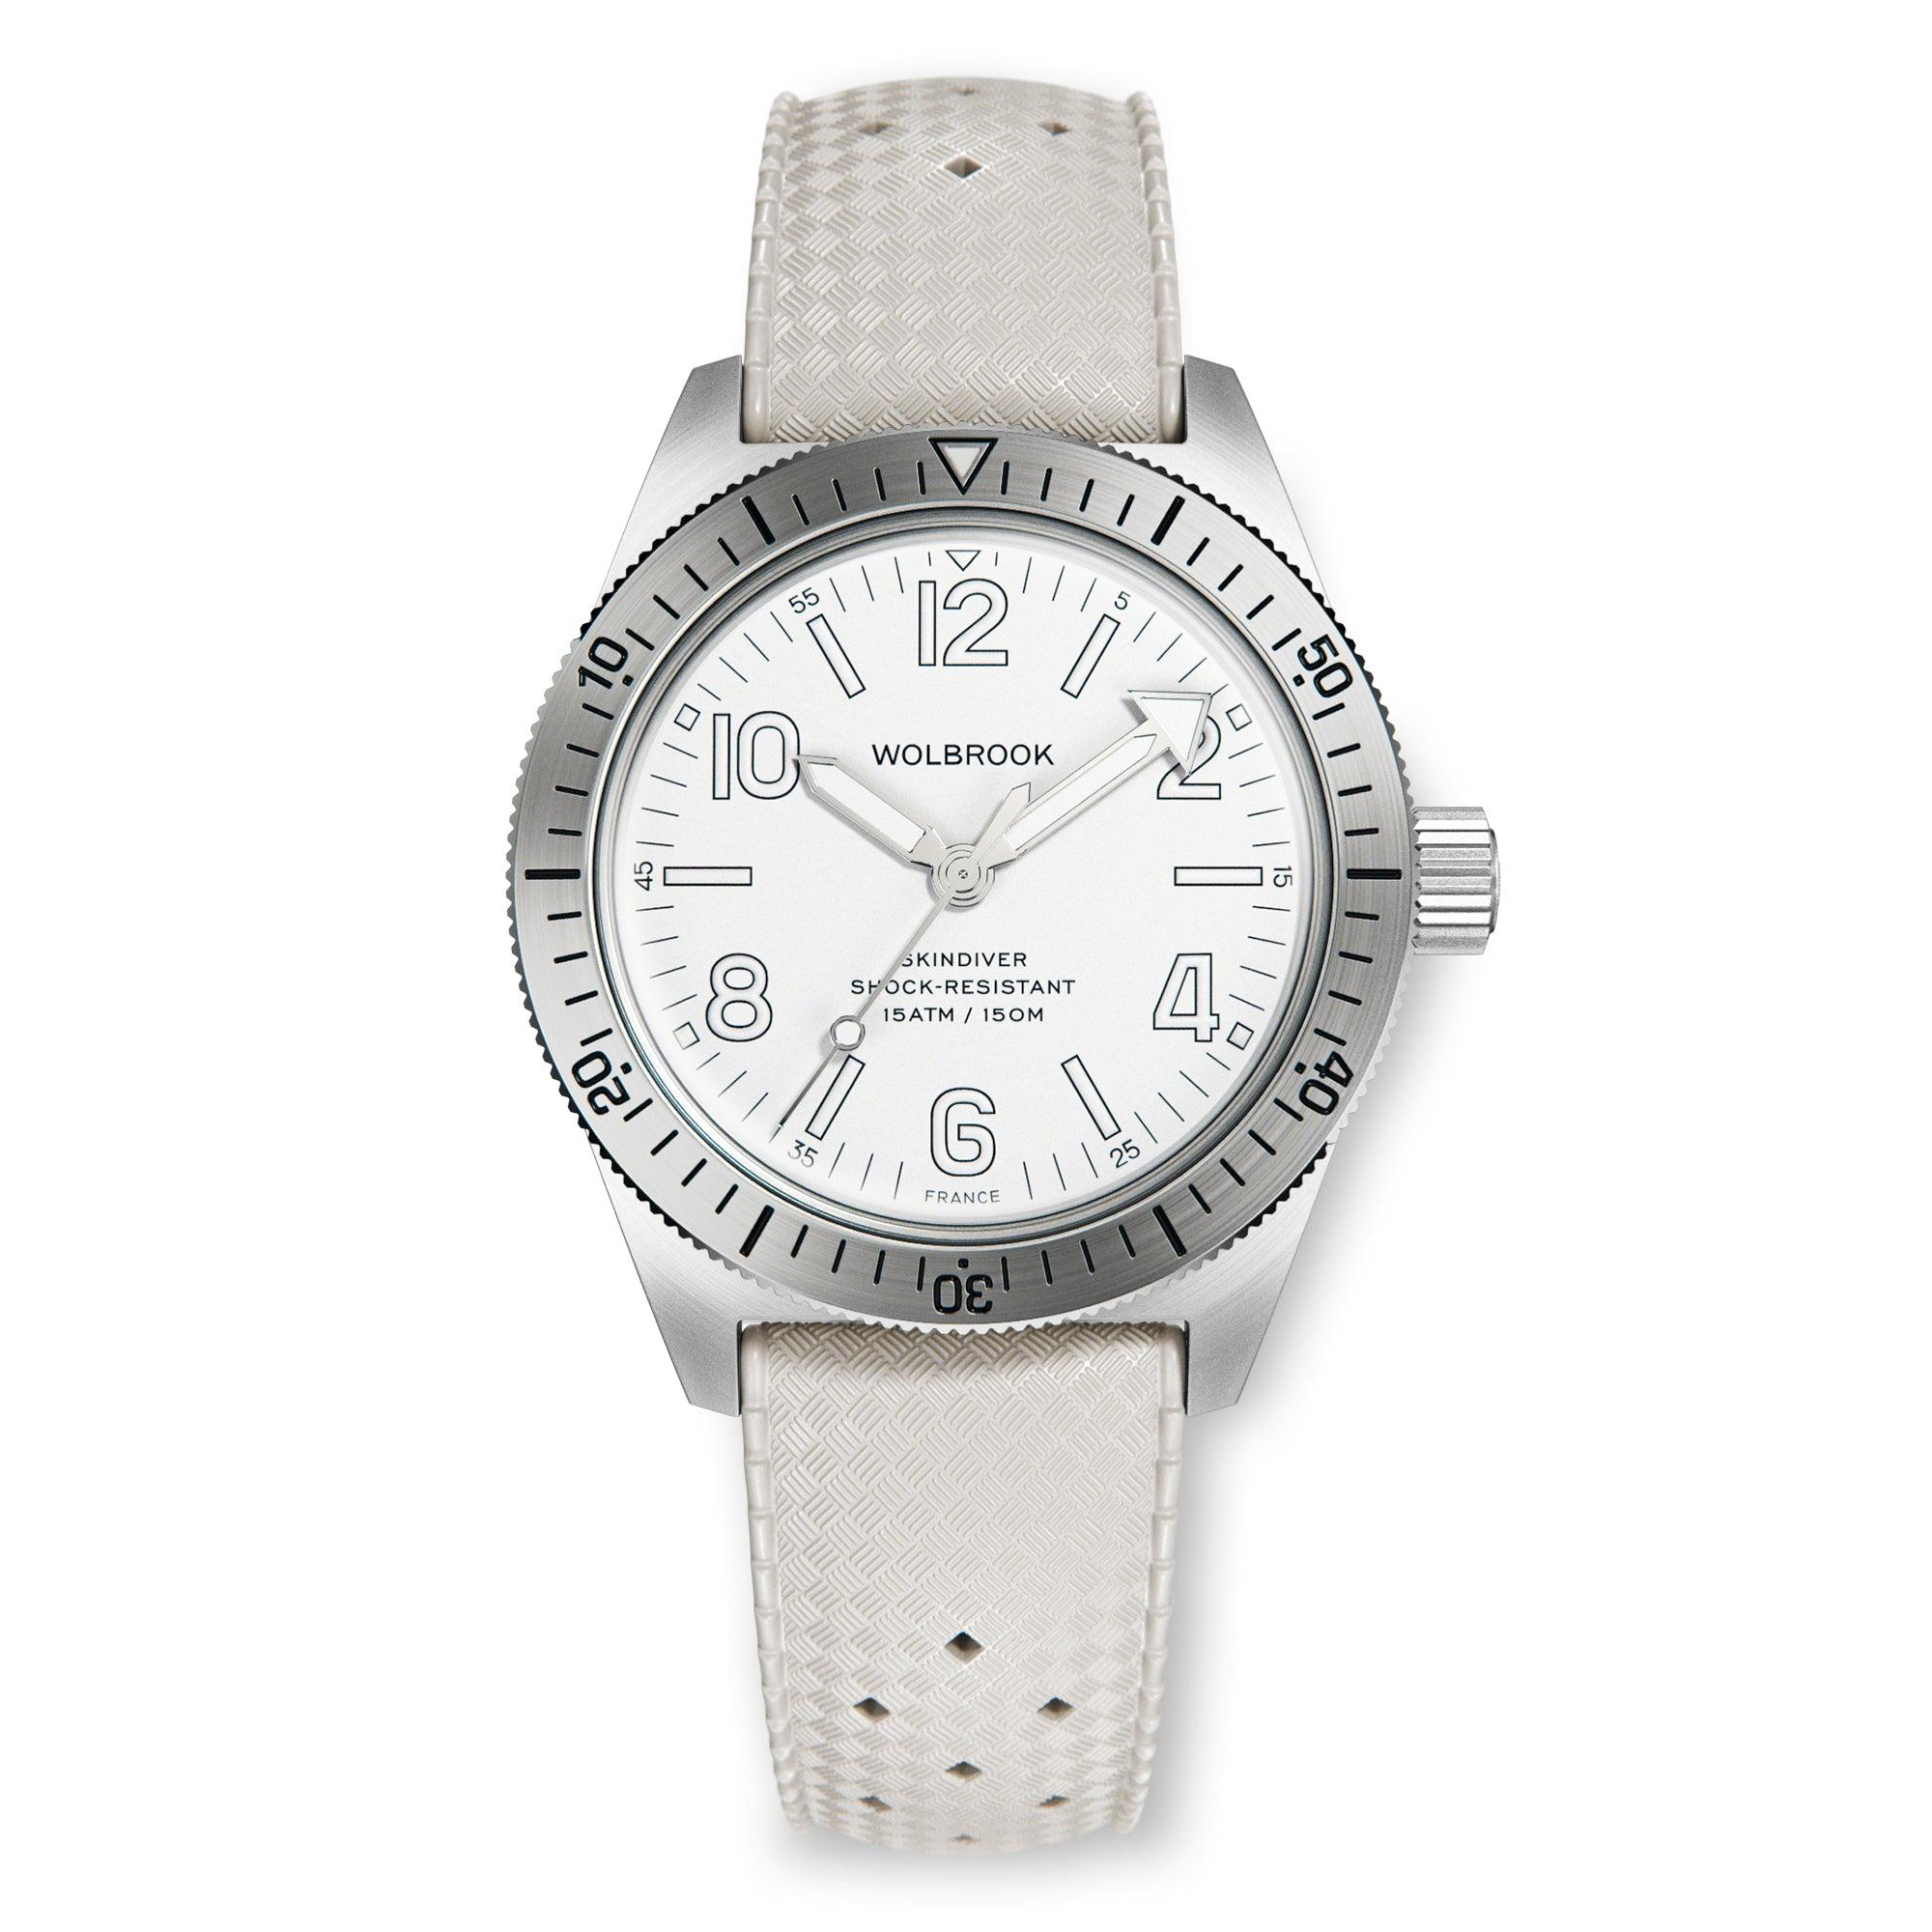 Skindiver Automatic Watch – All White